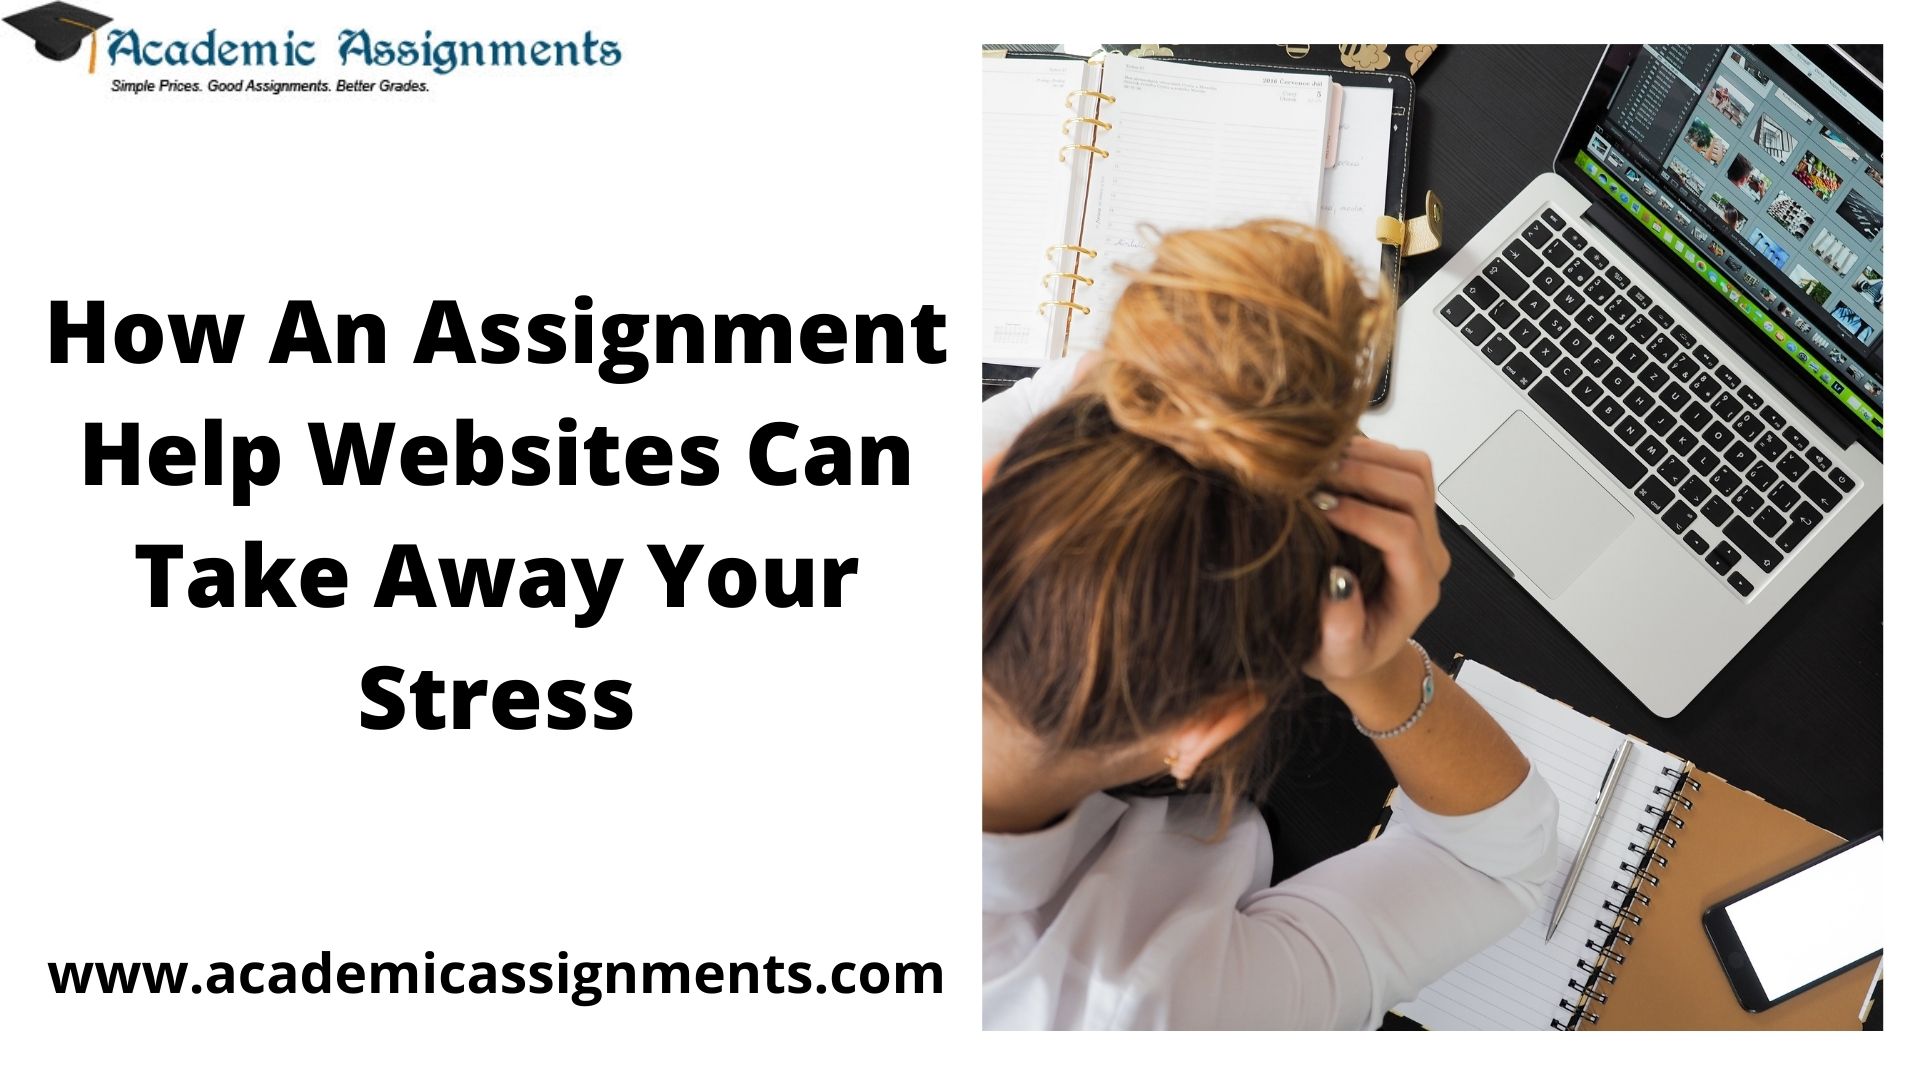 How An Assignment Help Websites Can Take Away Your Stress